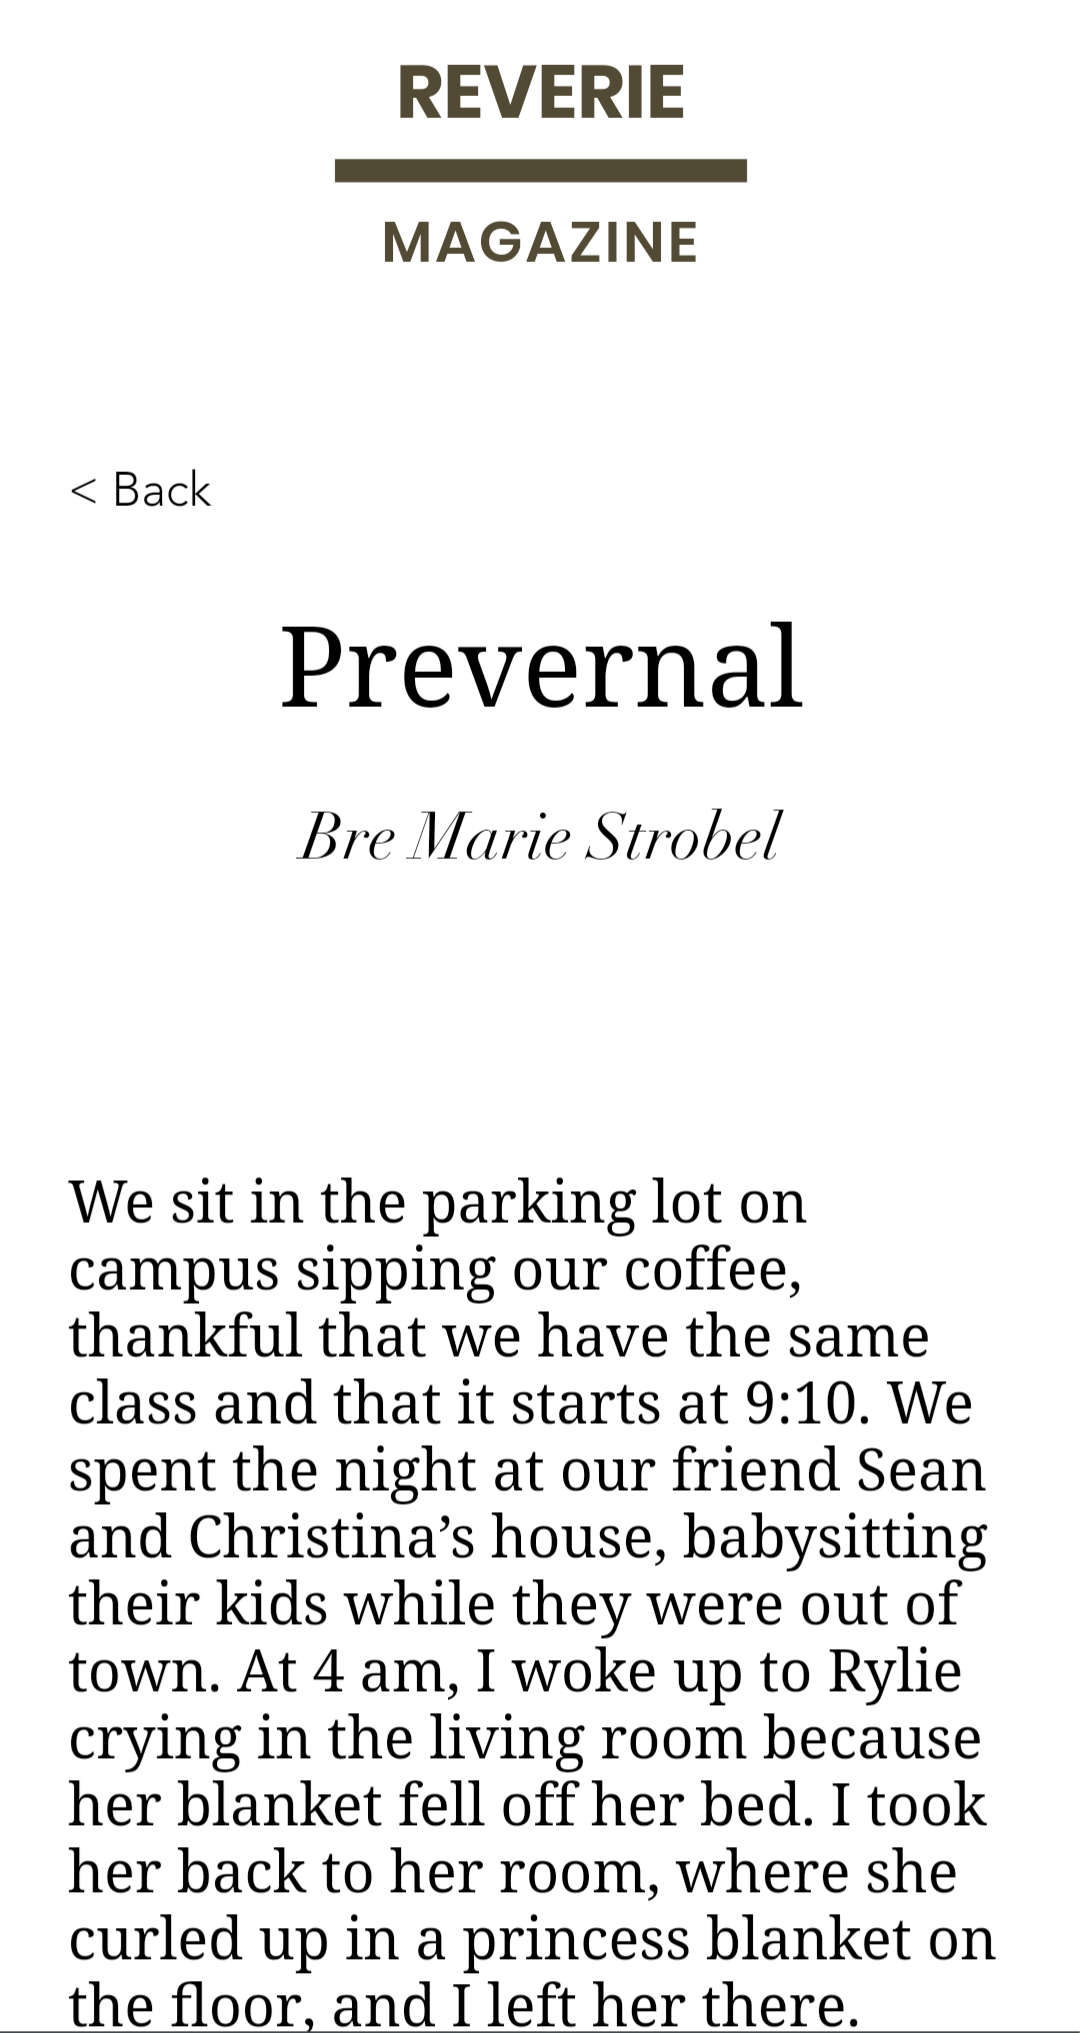 screenshot of my piece "Prevernal," read at the link above.